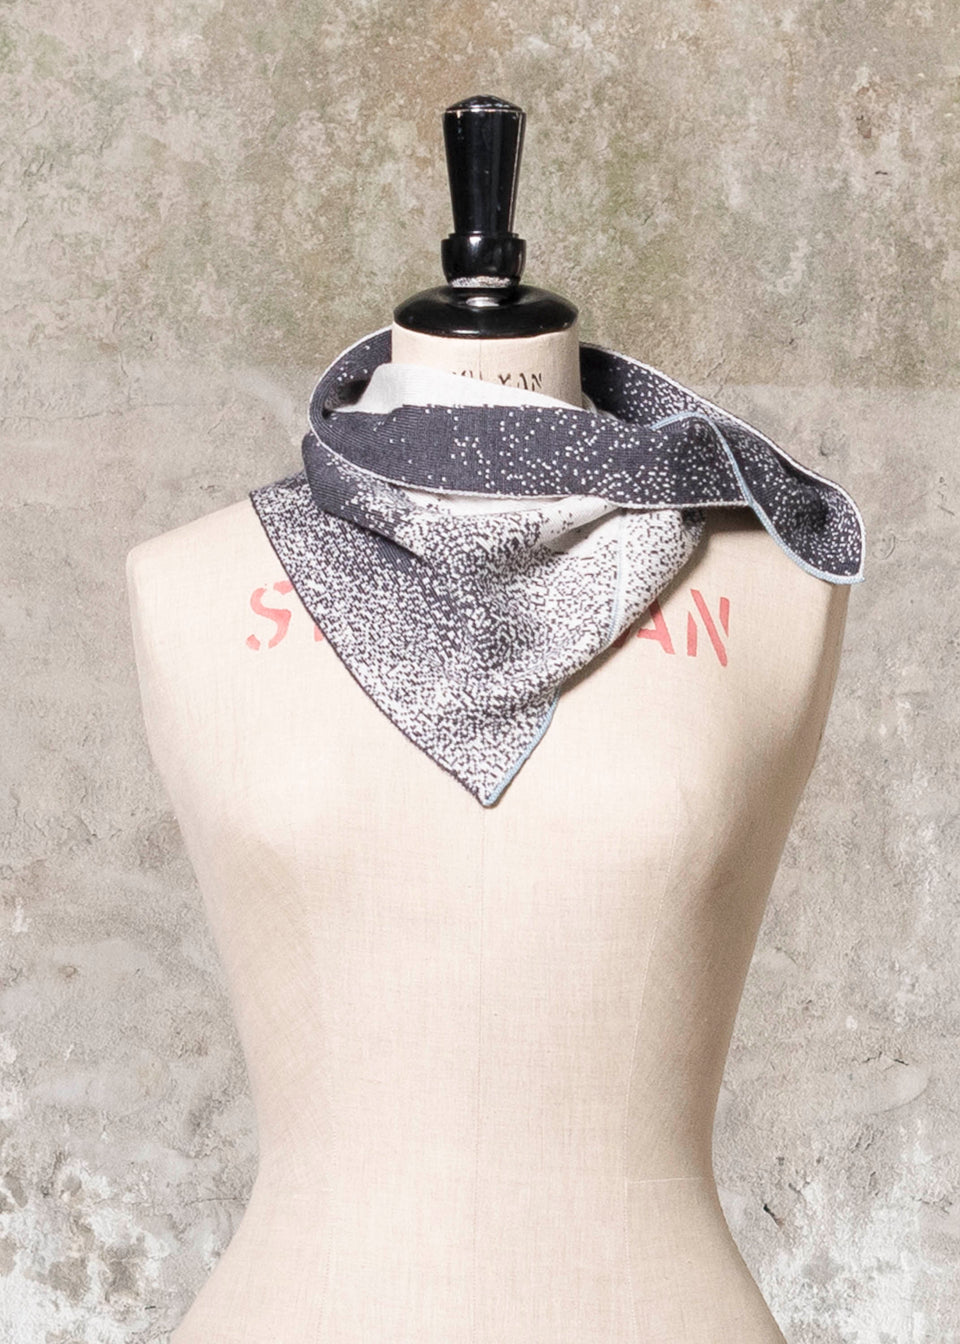 Knitted Byre cowl. Abstract, graphic design in an asymmetric shape. Shown in Charcoal and stone white